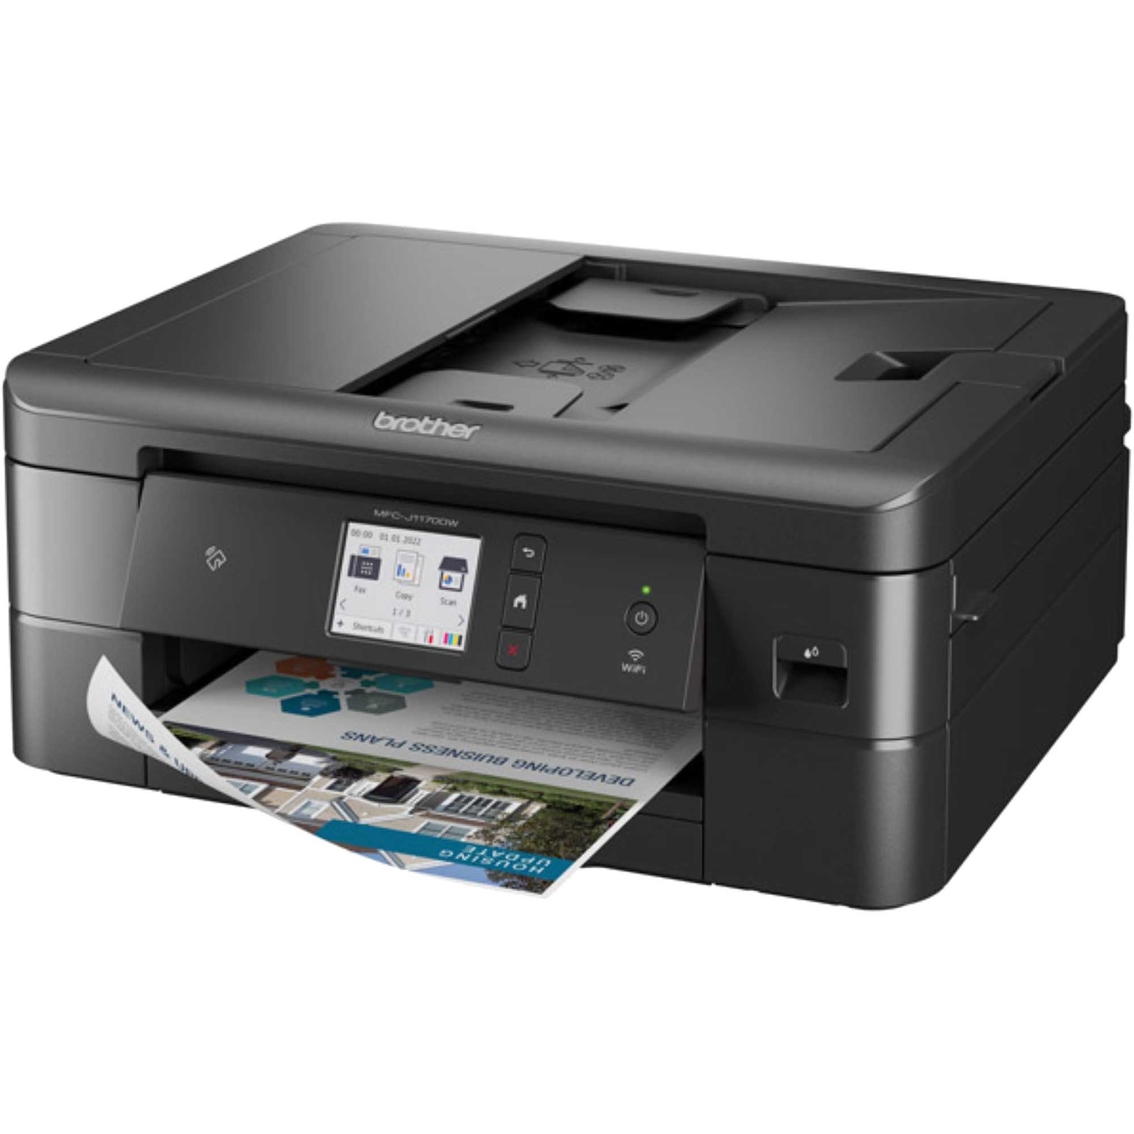 Brother MFC-J1170DW Wireless Color Inkjet All-in-One Printer - Image 2 of 3